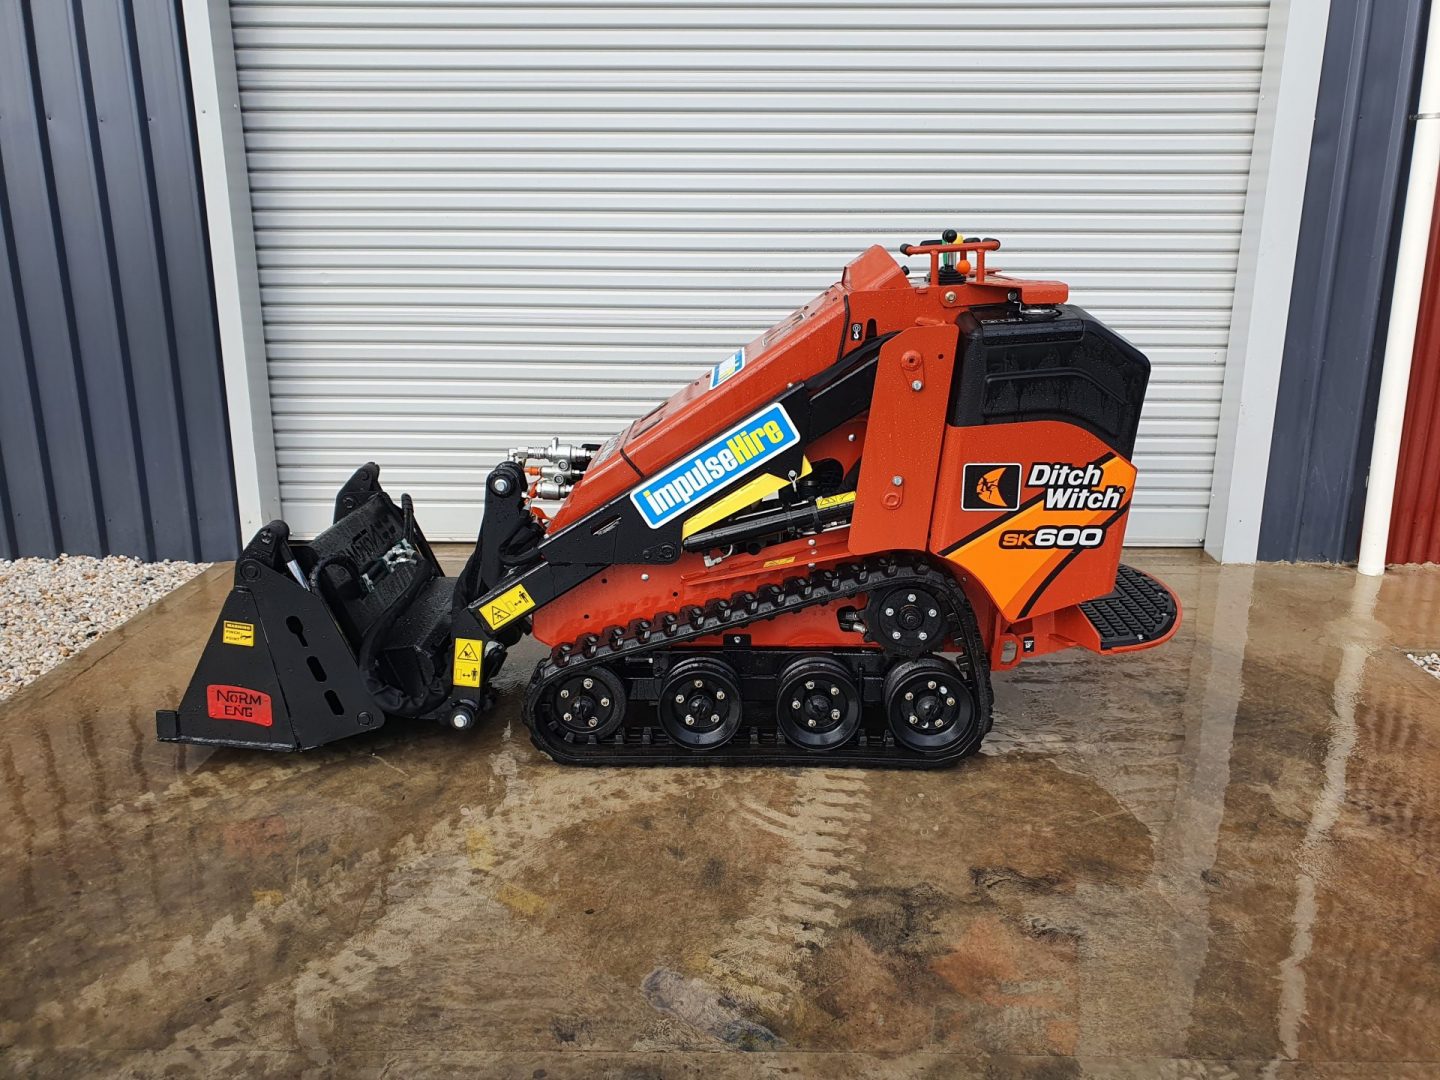 Ditch Witch Sk600 Scaled